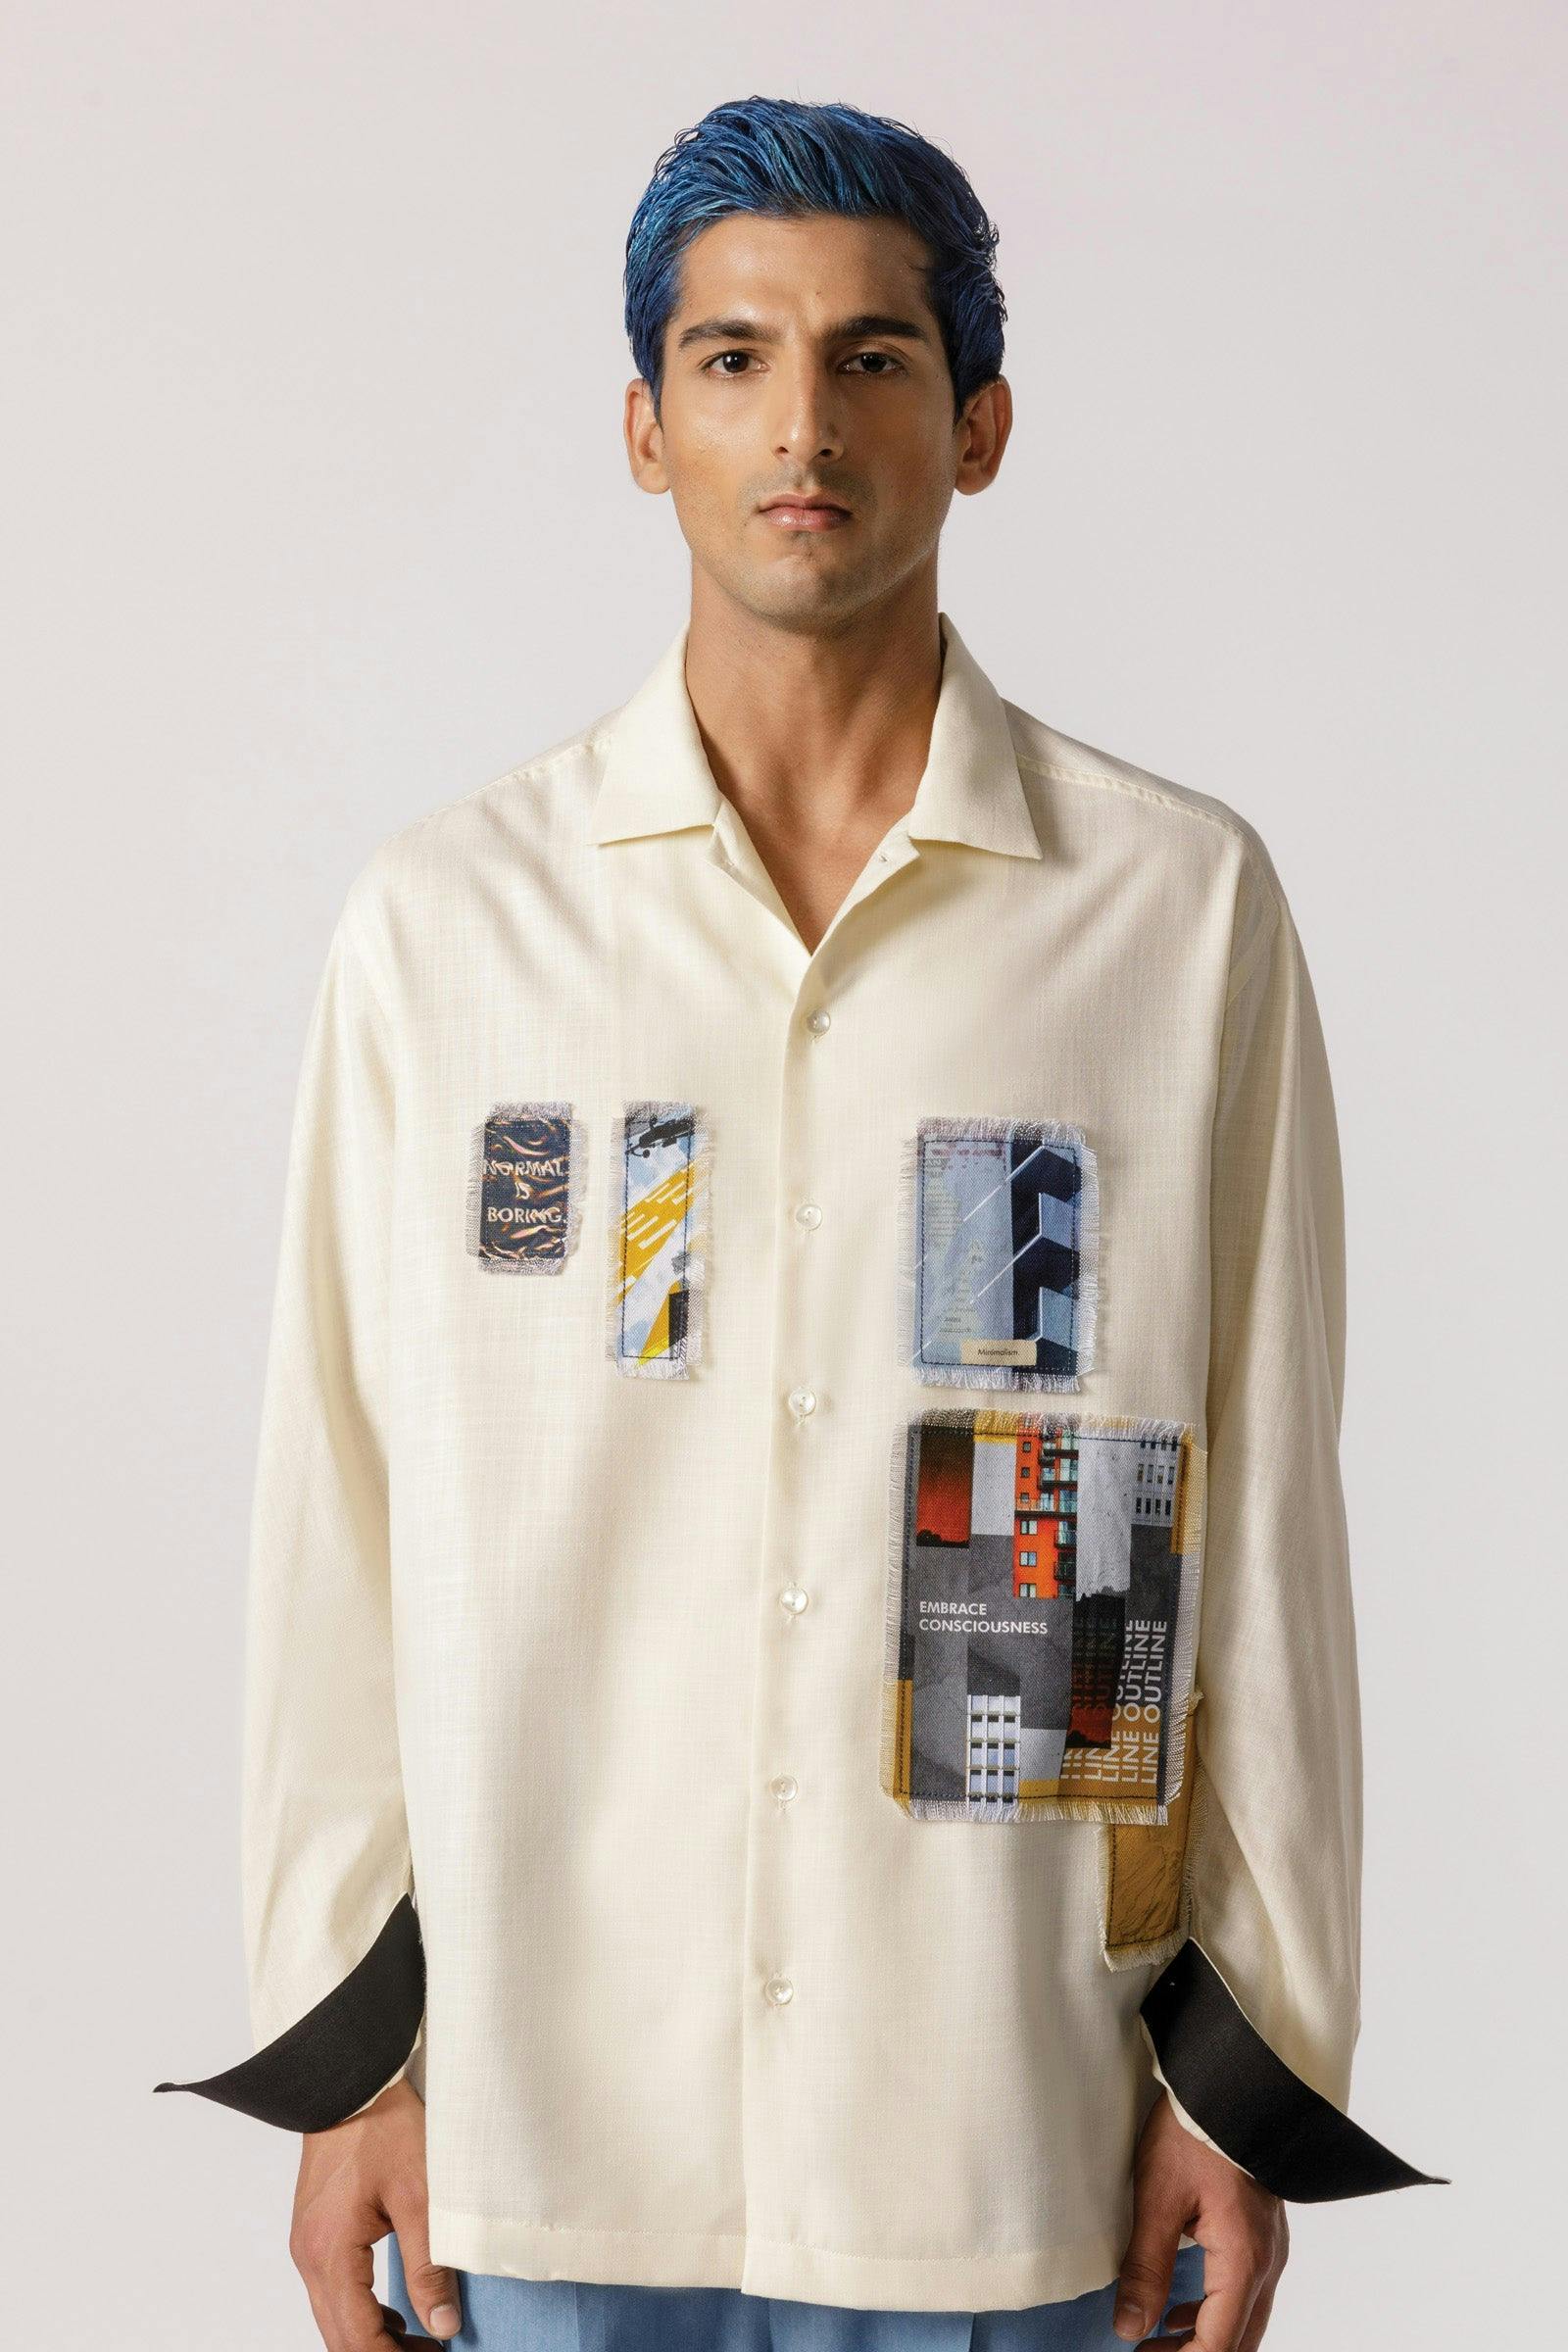 Oversized Patch work shirt(offwhite), a product by Line Outline